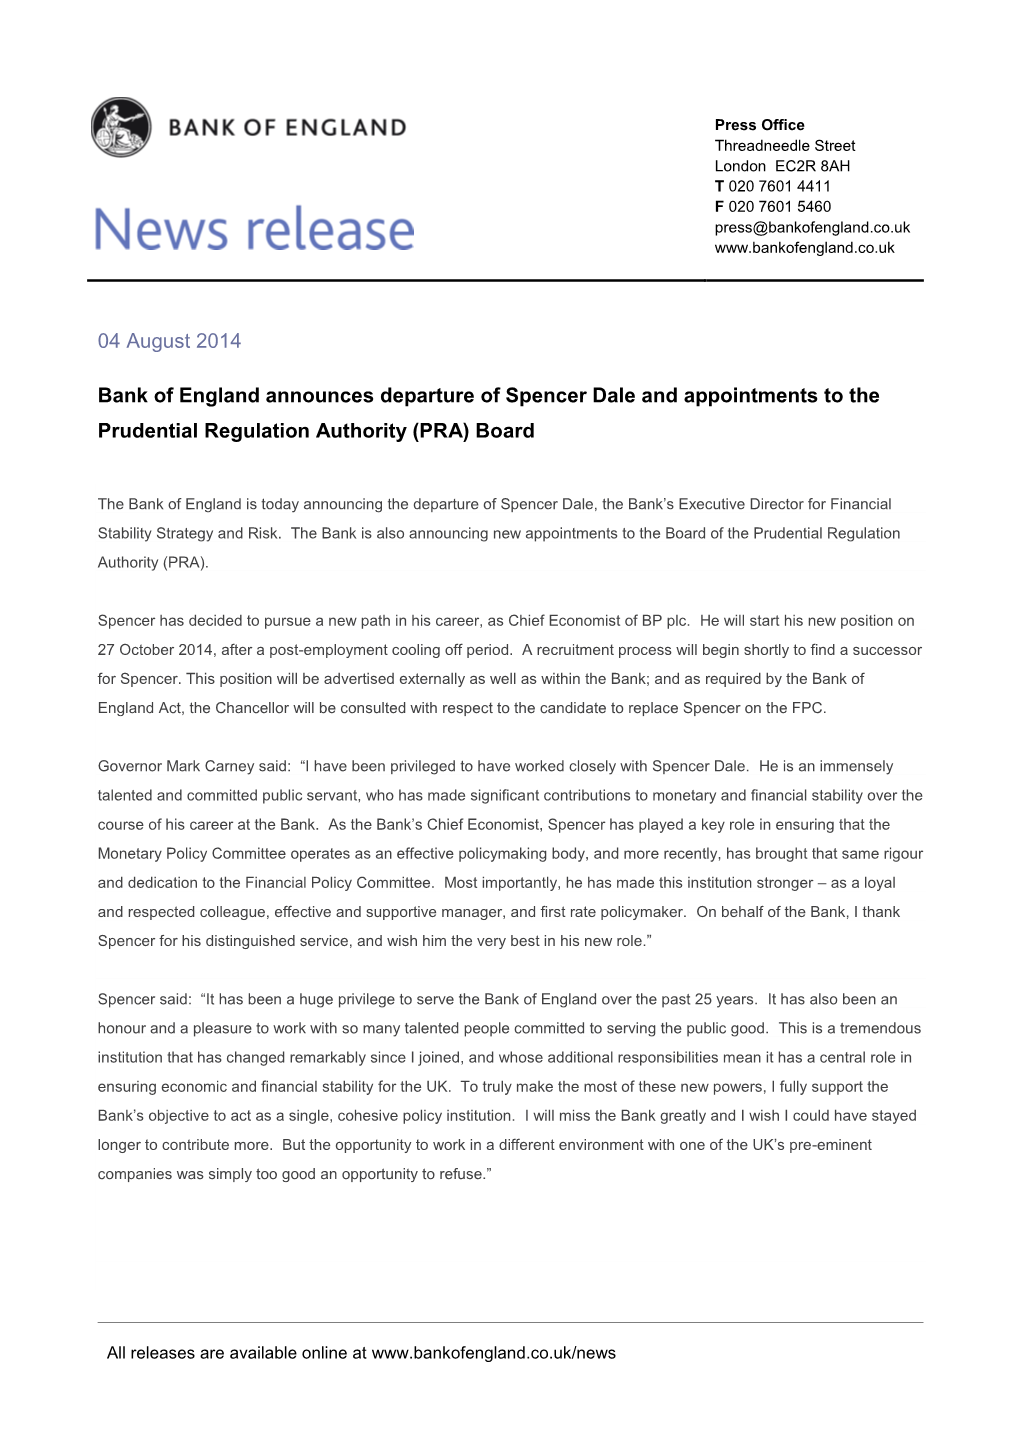 Bank of England Announces Departure of Spencer Dale and Appointments to the Prudential Regulation Authority (PRA) Board